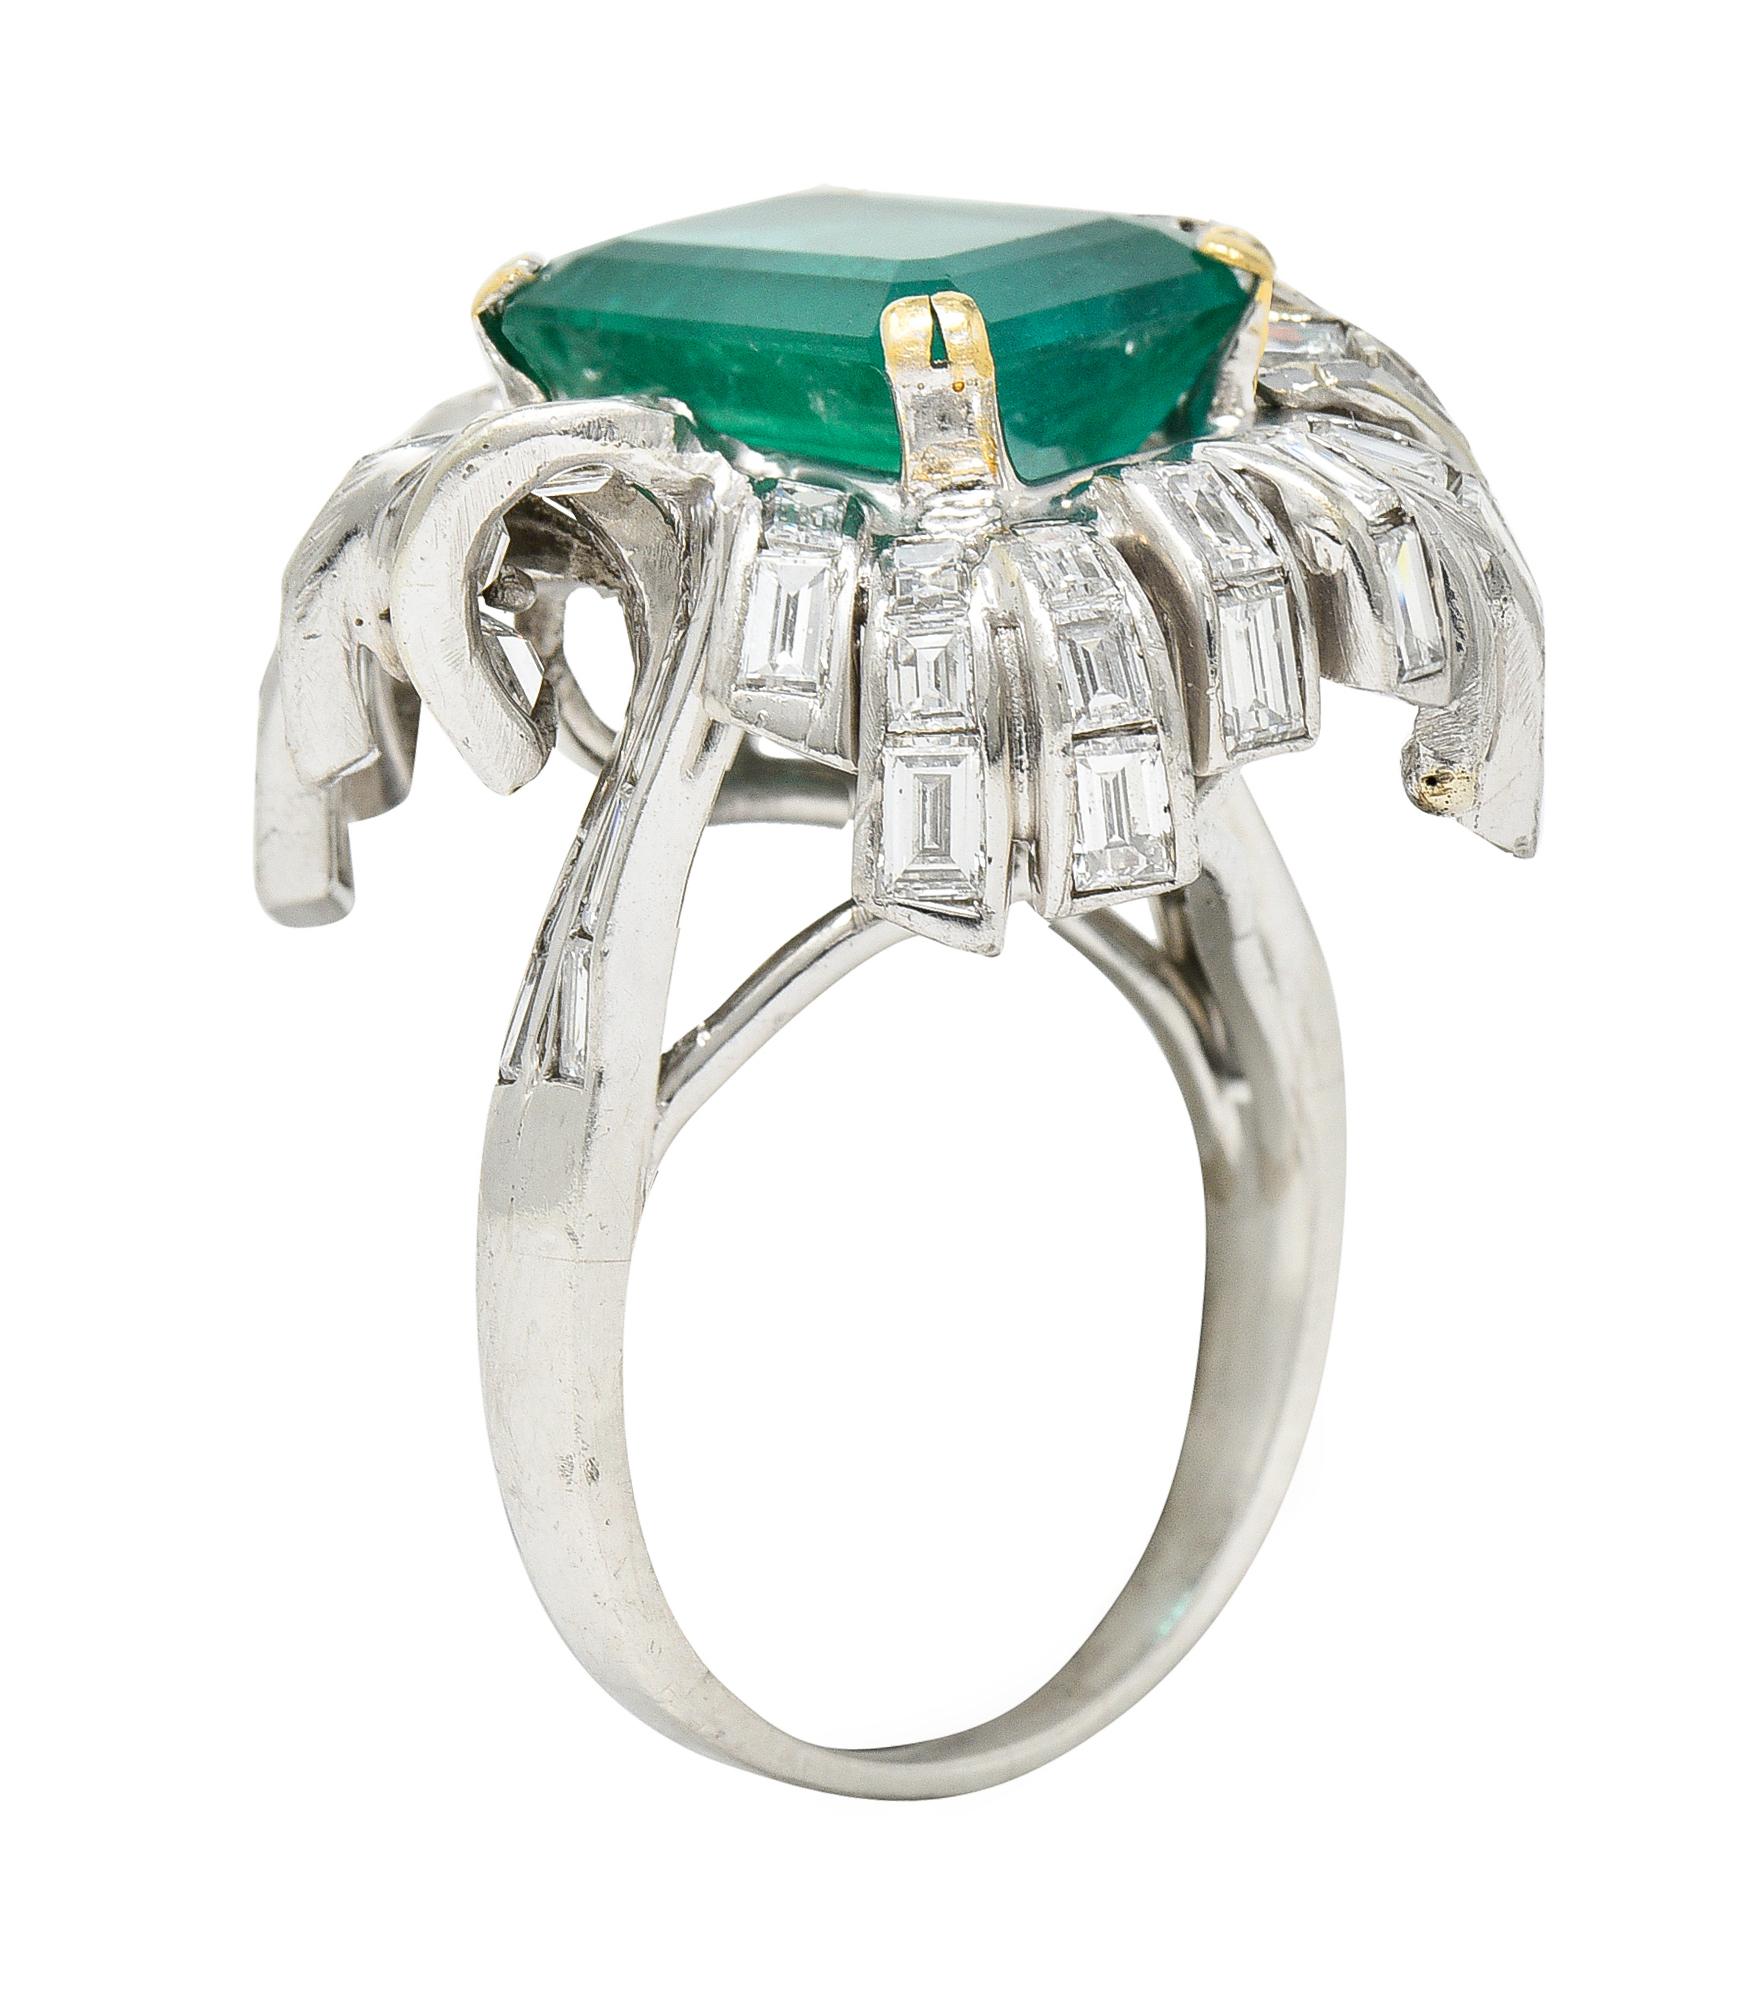 Cluster style cocktail ring centers an emerald cut emerald weighing approximately 6.65 carats

Strongly bluish green in color and translucent with natural inclusions

Set by gold prongs then surrounded by undulating channel set tendrils featuring